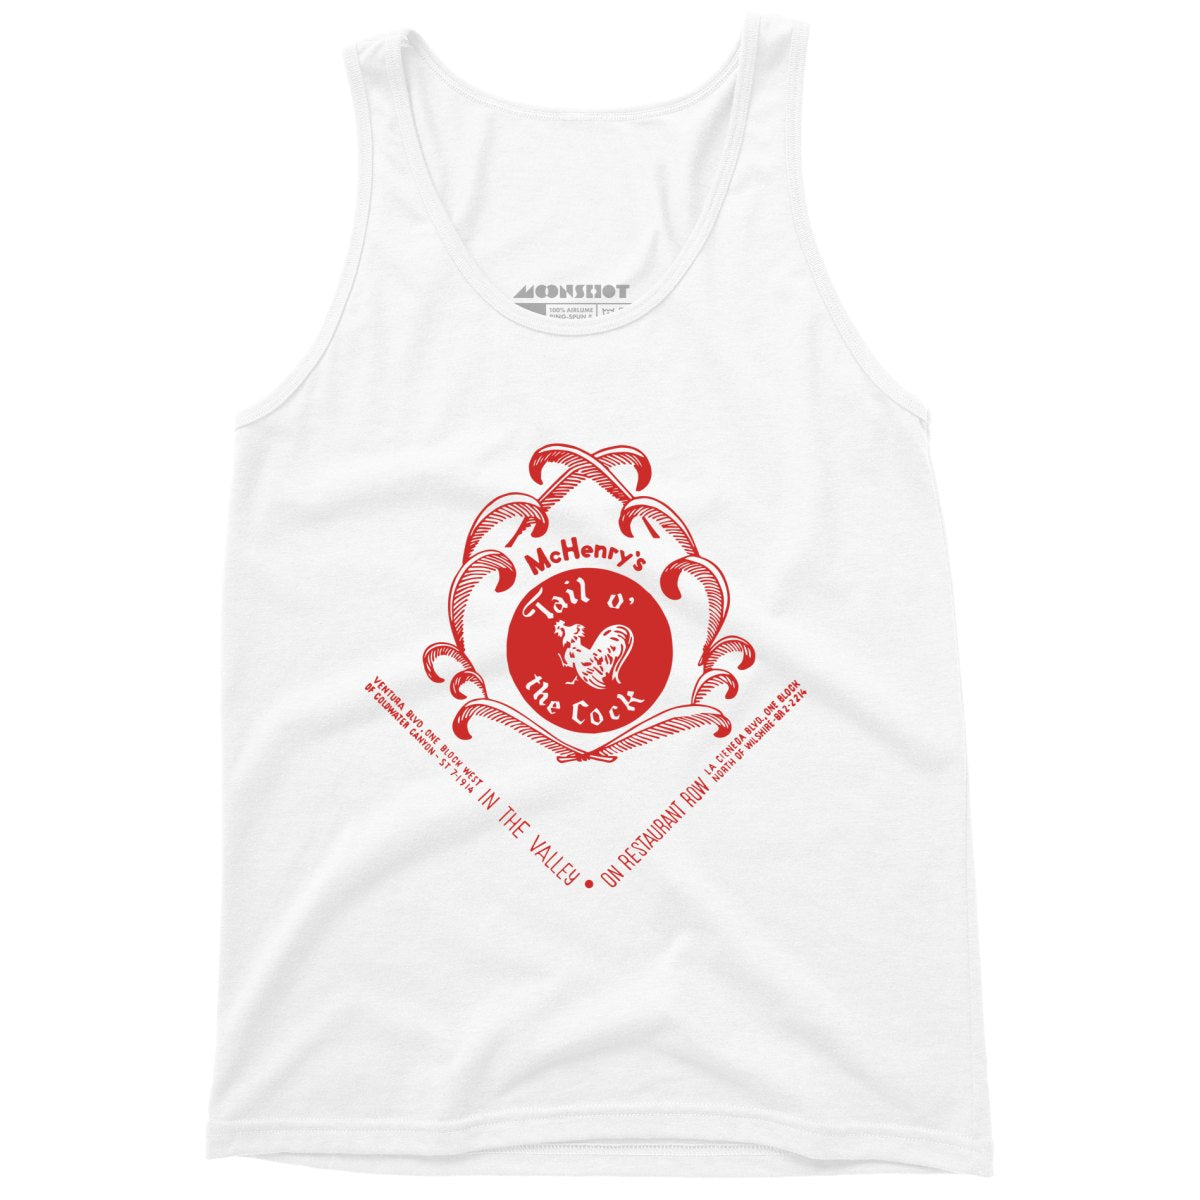 McHenry's Tail o' the Cock v2 - Los Angeles, CA - Vintage Restaurant - Unisex Tank Top